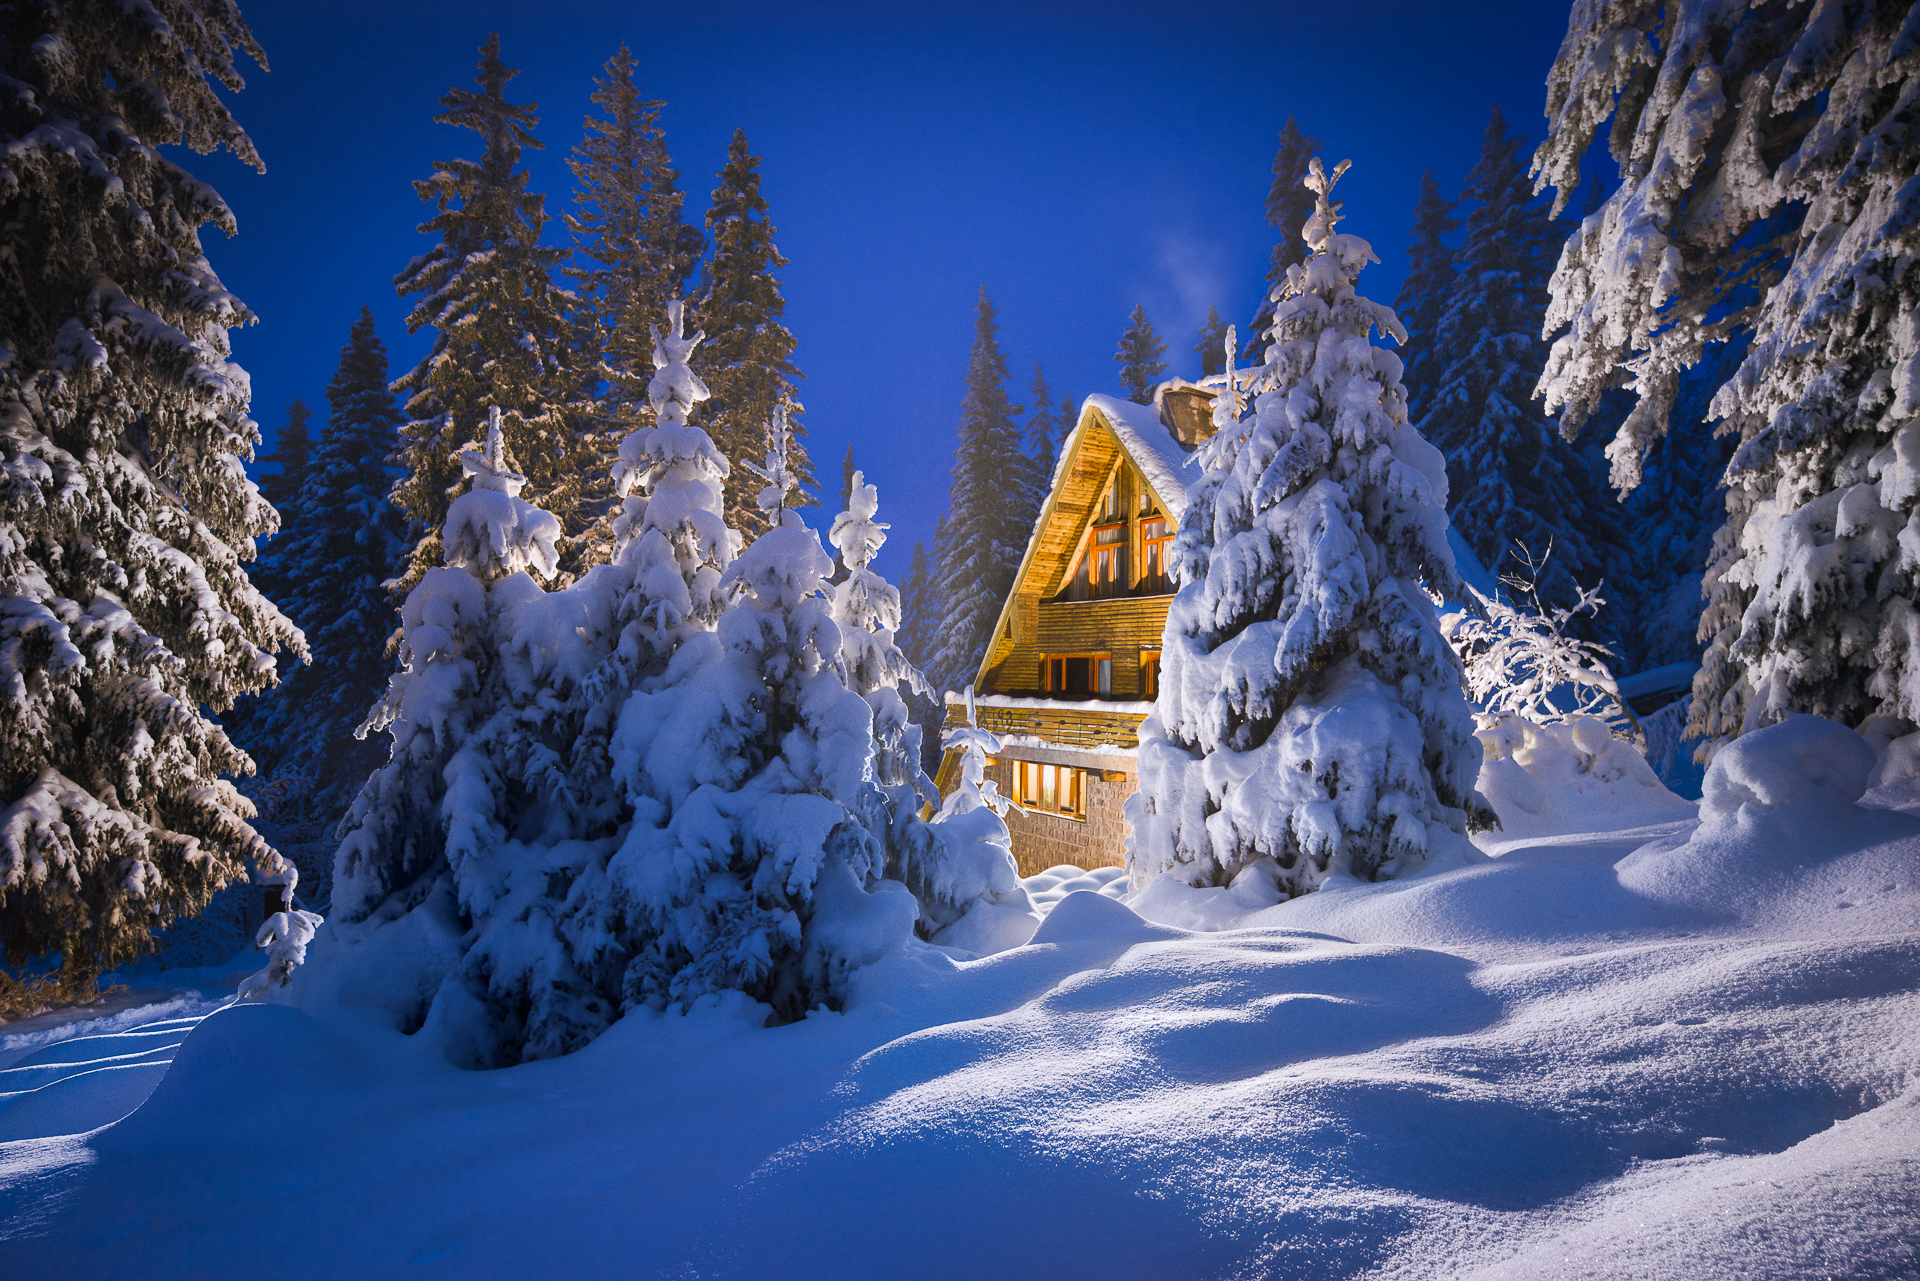 Free photo The house in the night winter forest